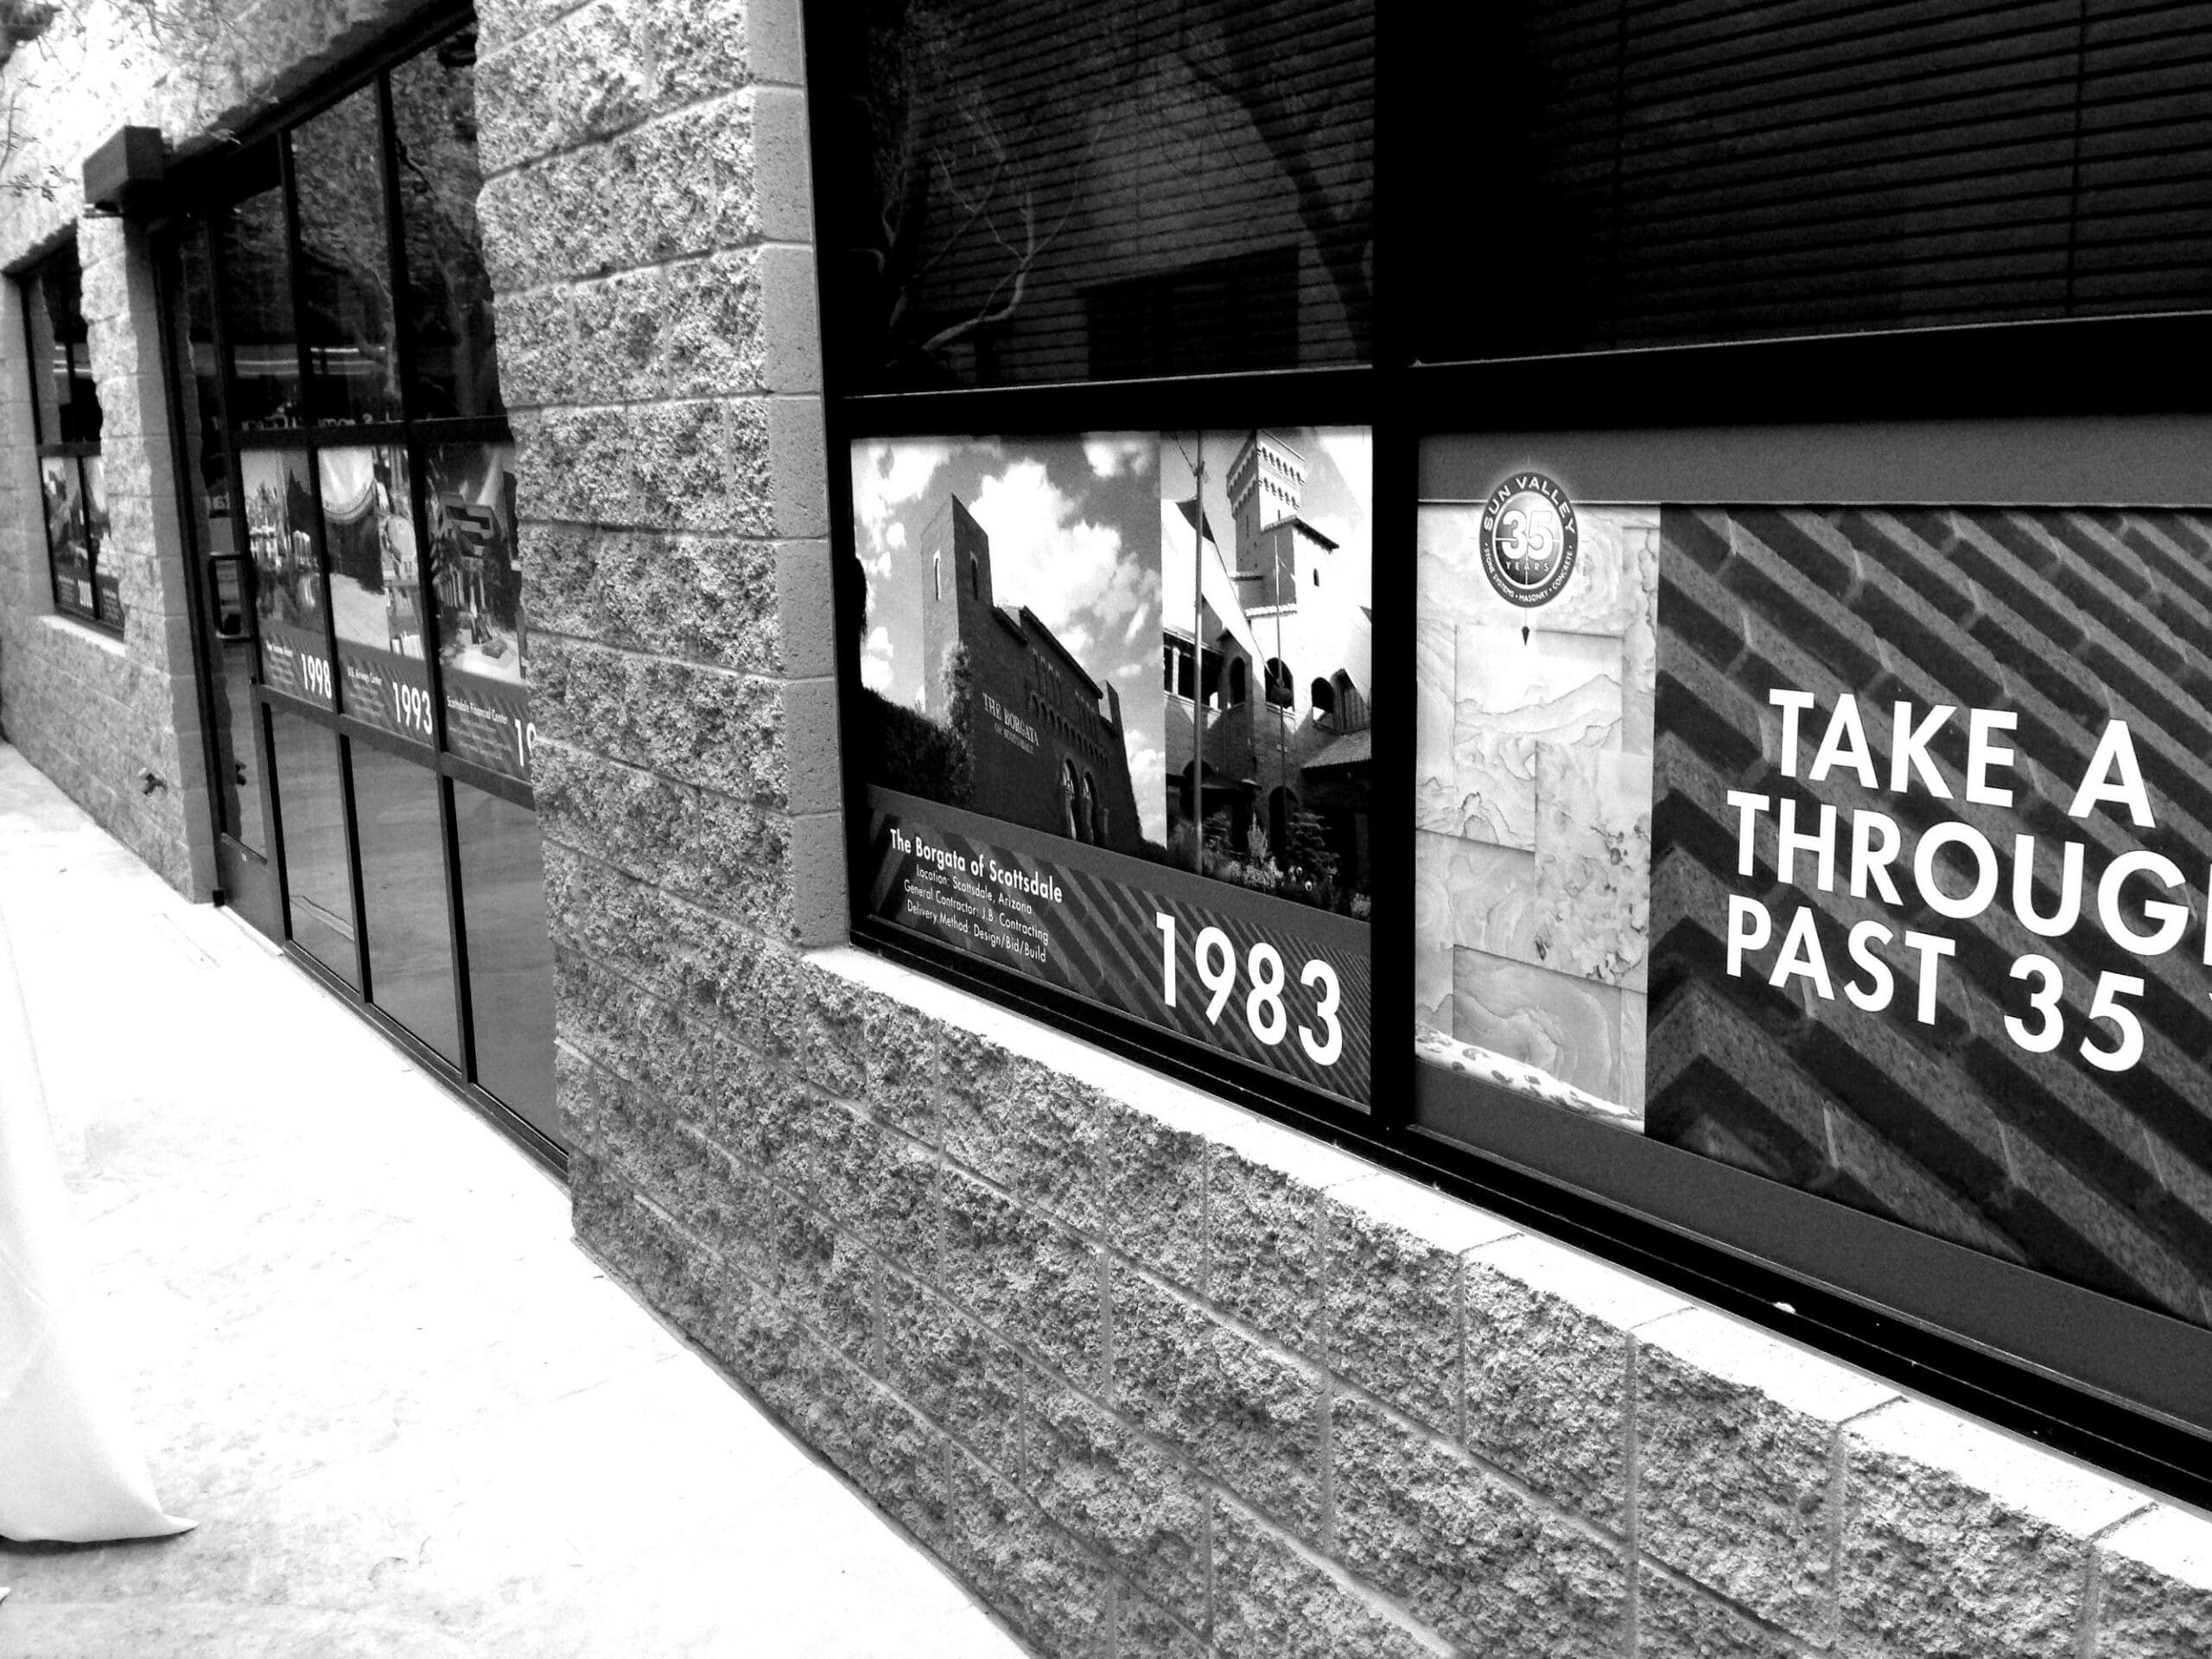 A black and white photo showing a building with large windows displaying an exhibition about Sun Valley Construction with texts and images; one text reads "1983", and another says "take a tour through past